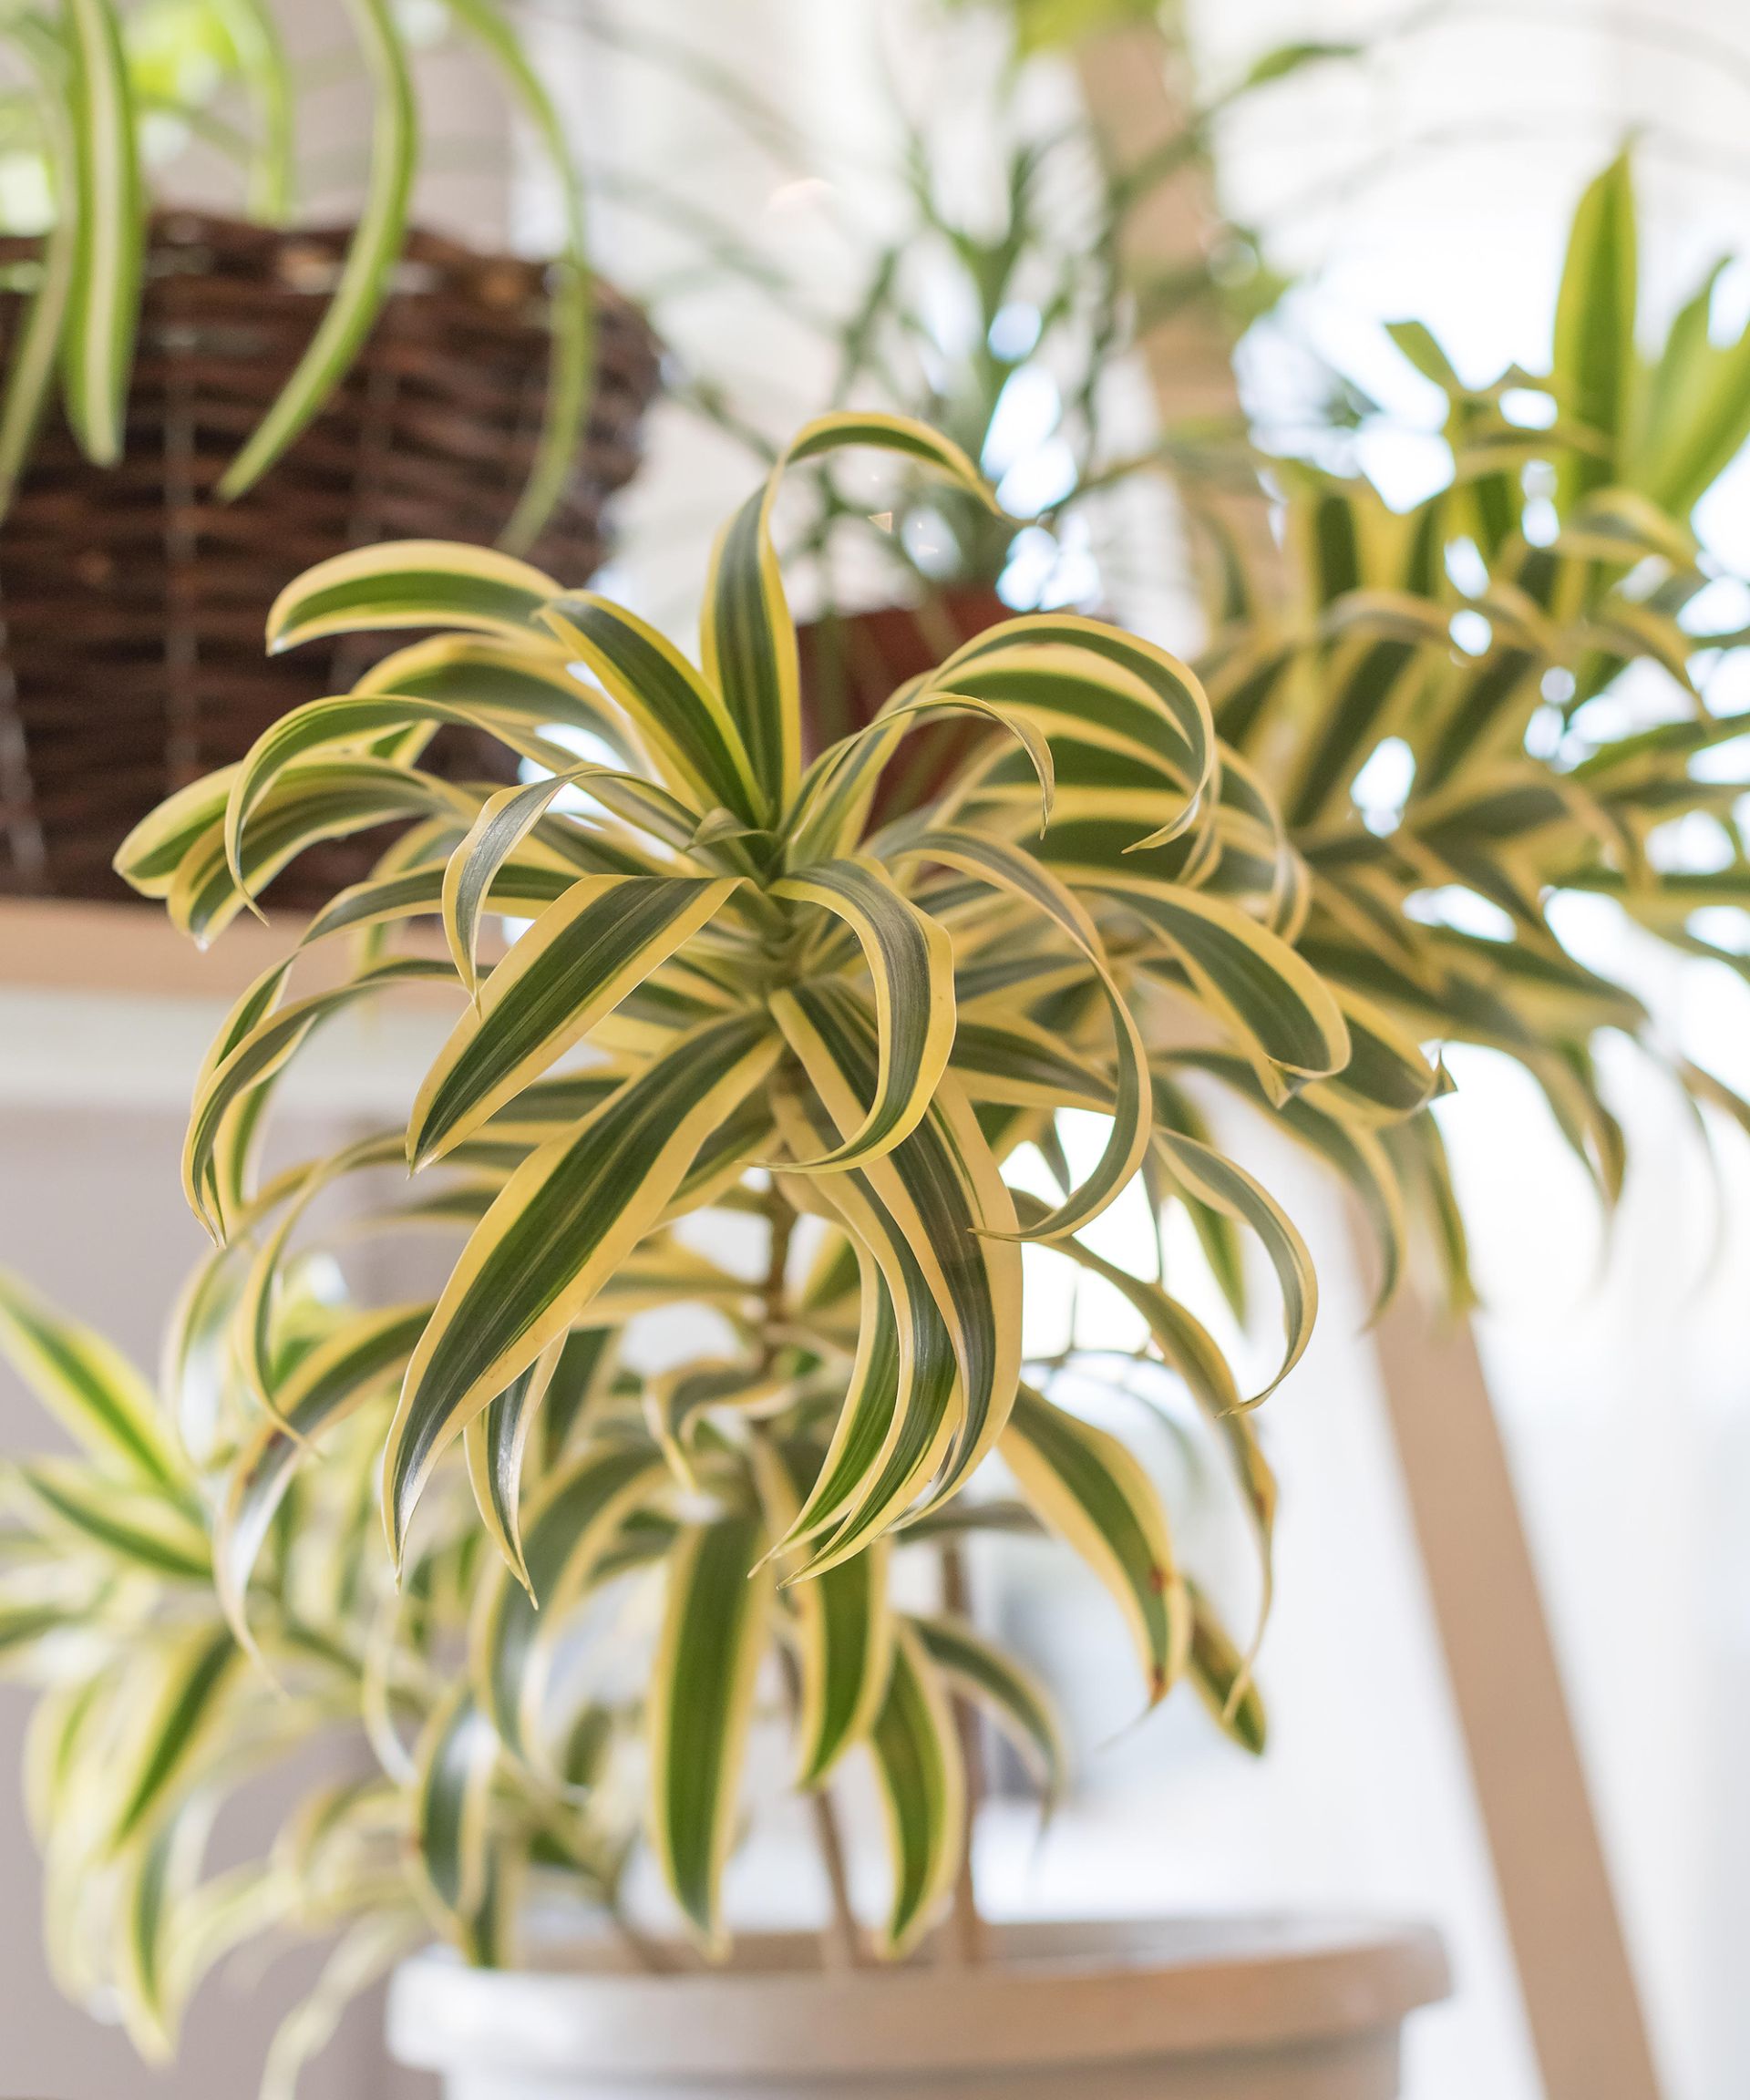 Best indoor hanging plants: 12 trailing houseplants for statement foliage